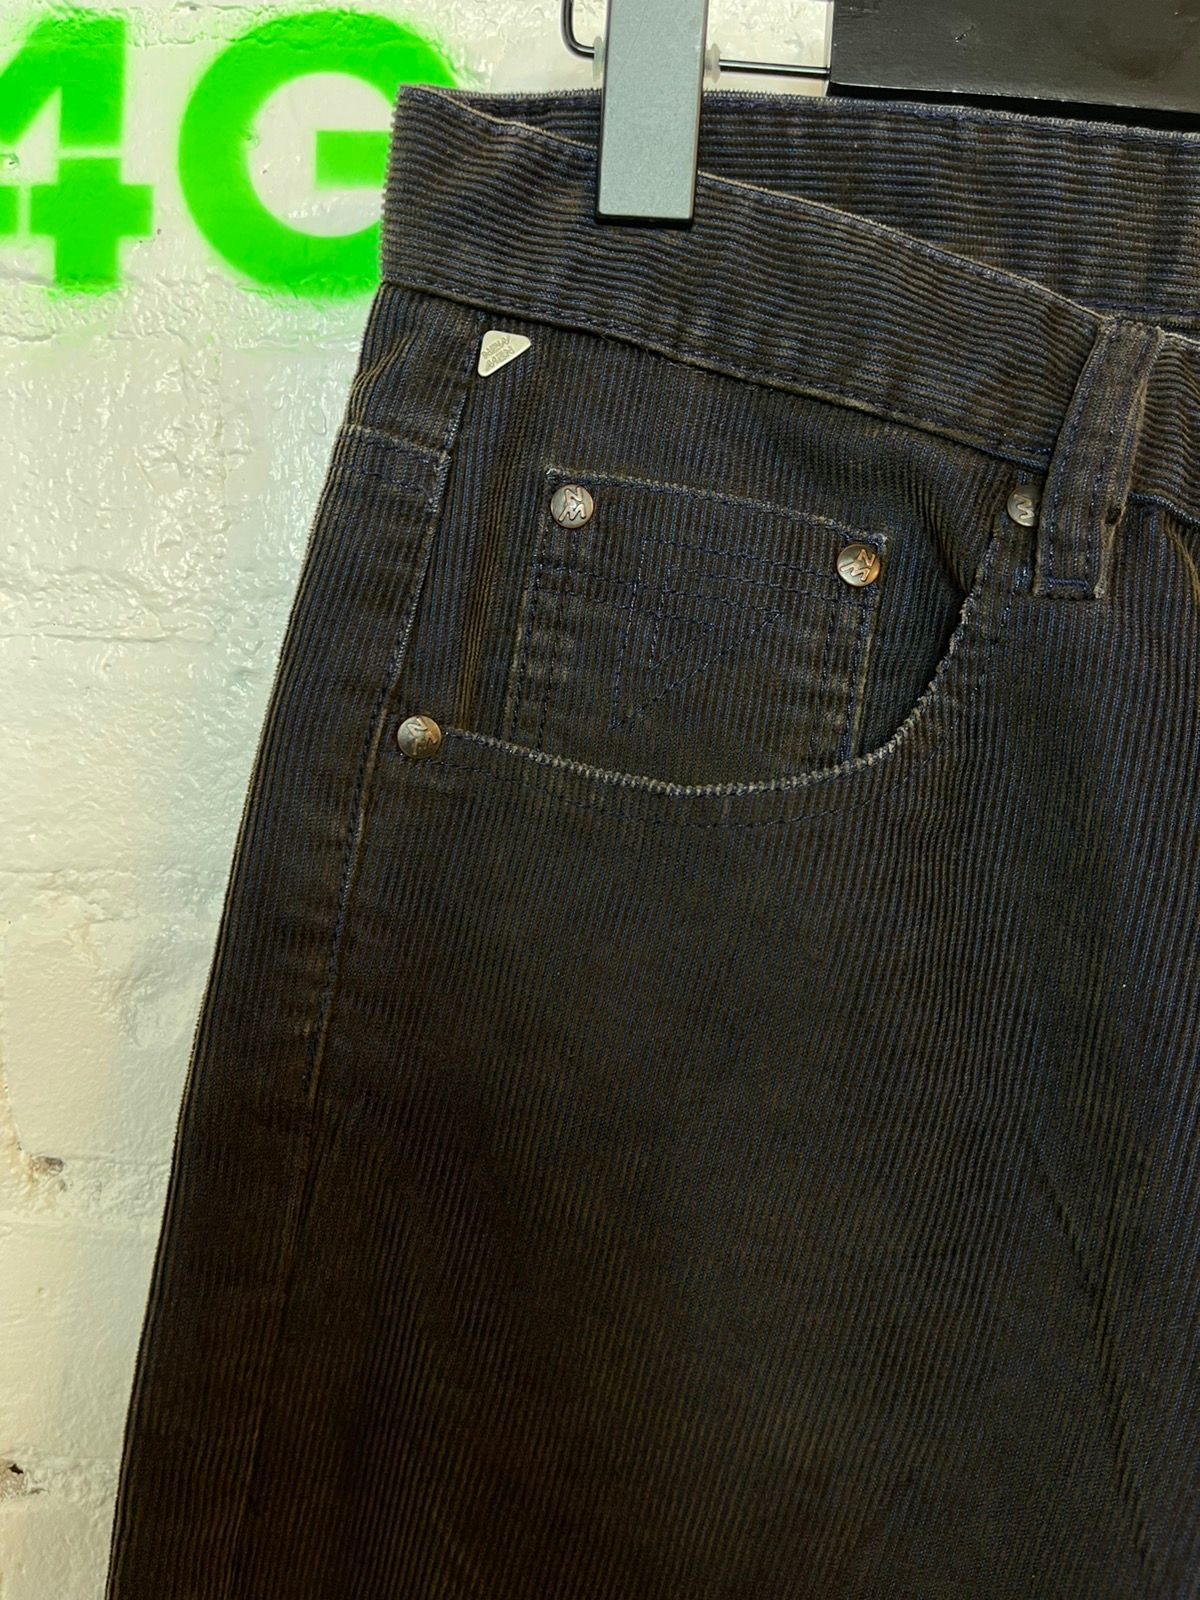 Vintage Corduroy Blue with Metallic Shimmer Jeans Pants